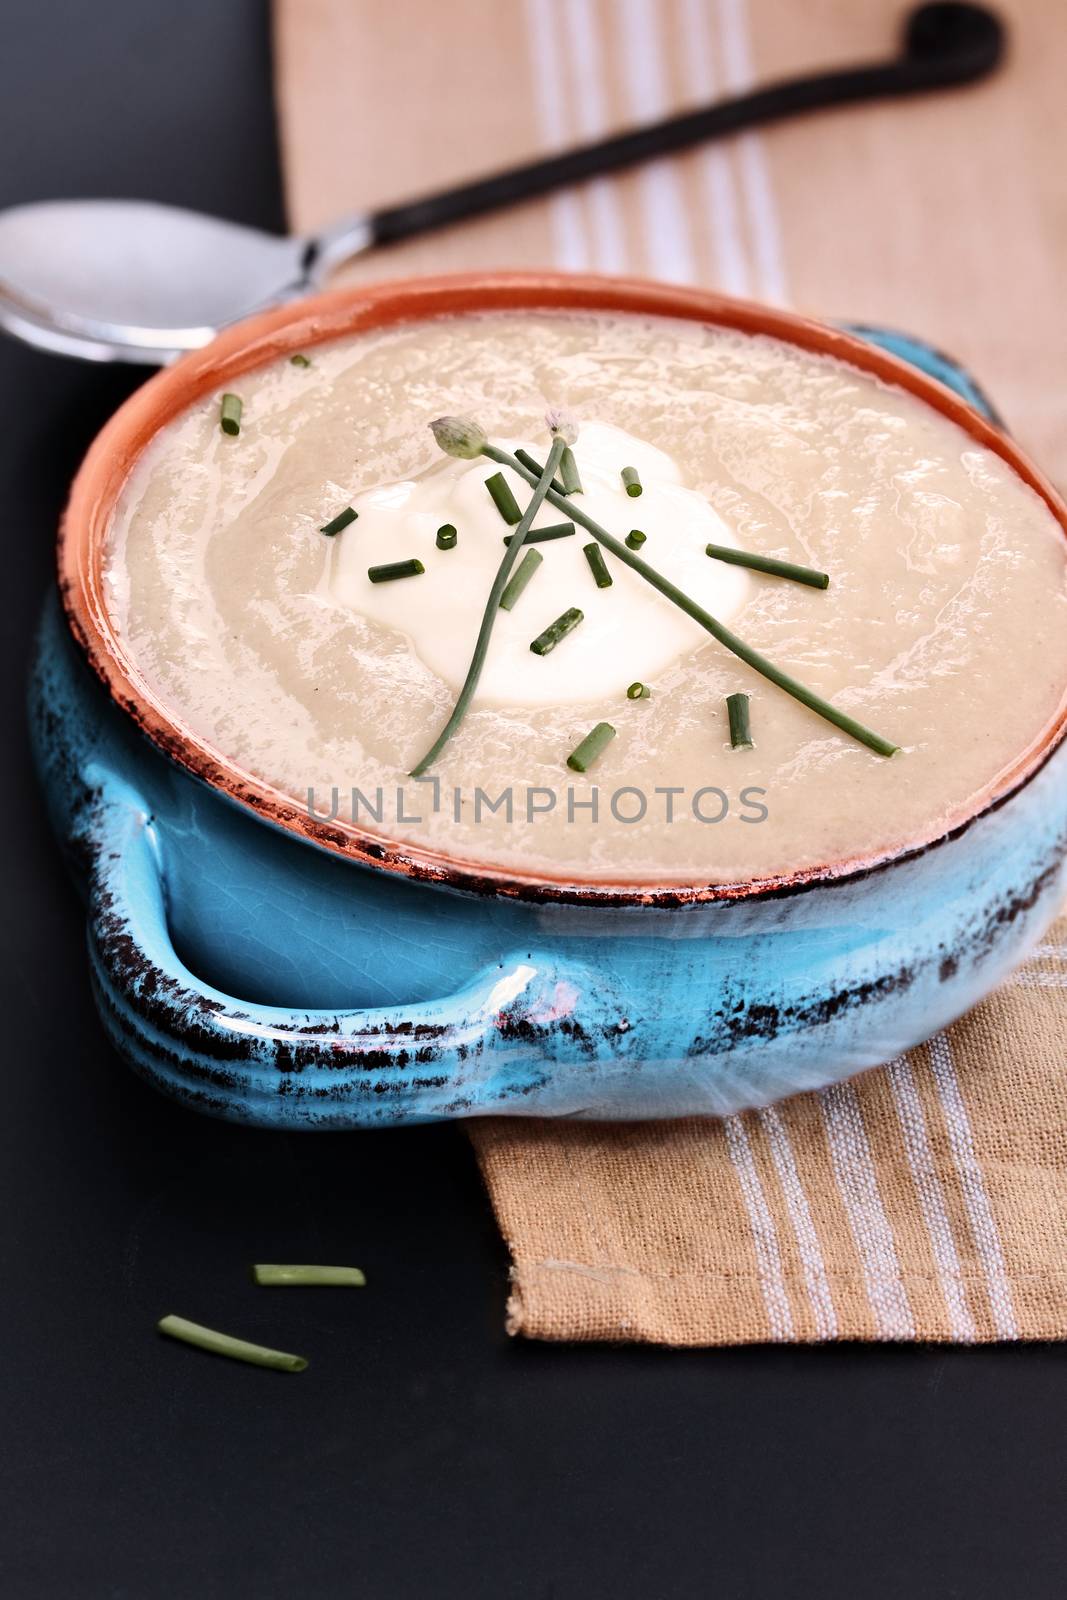 Potato and Leek Soup with sour cream and chives. Extreme shallow depth of field.